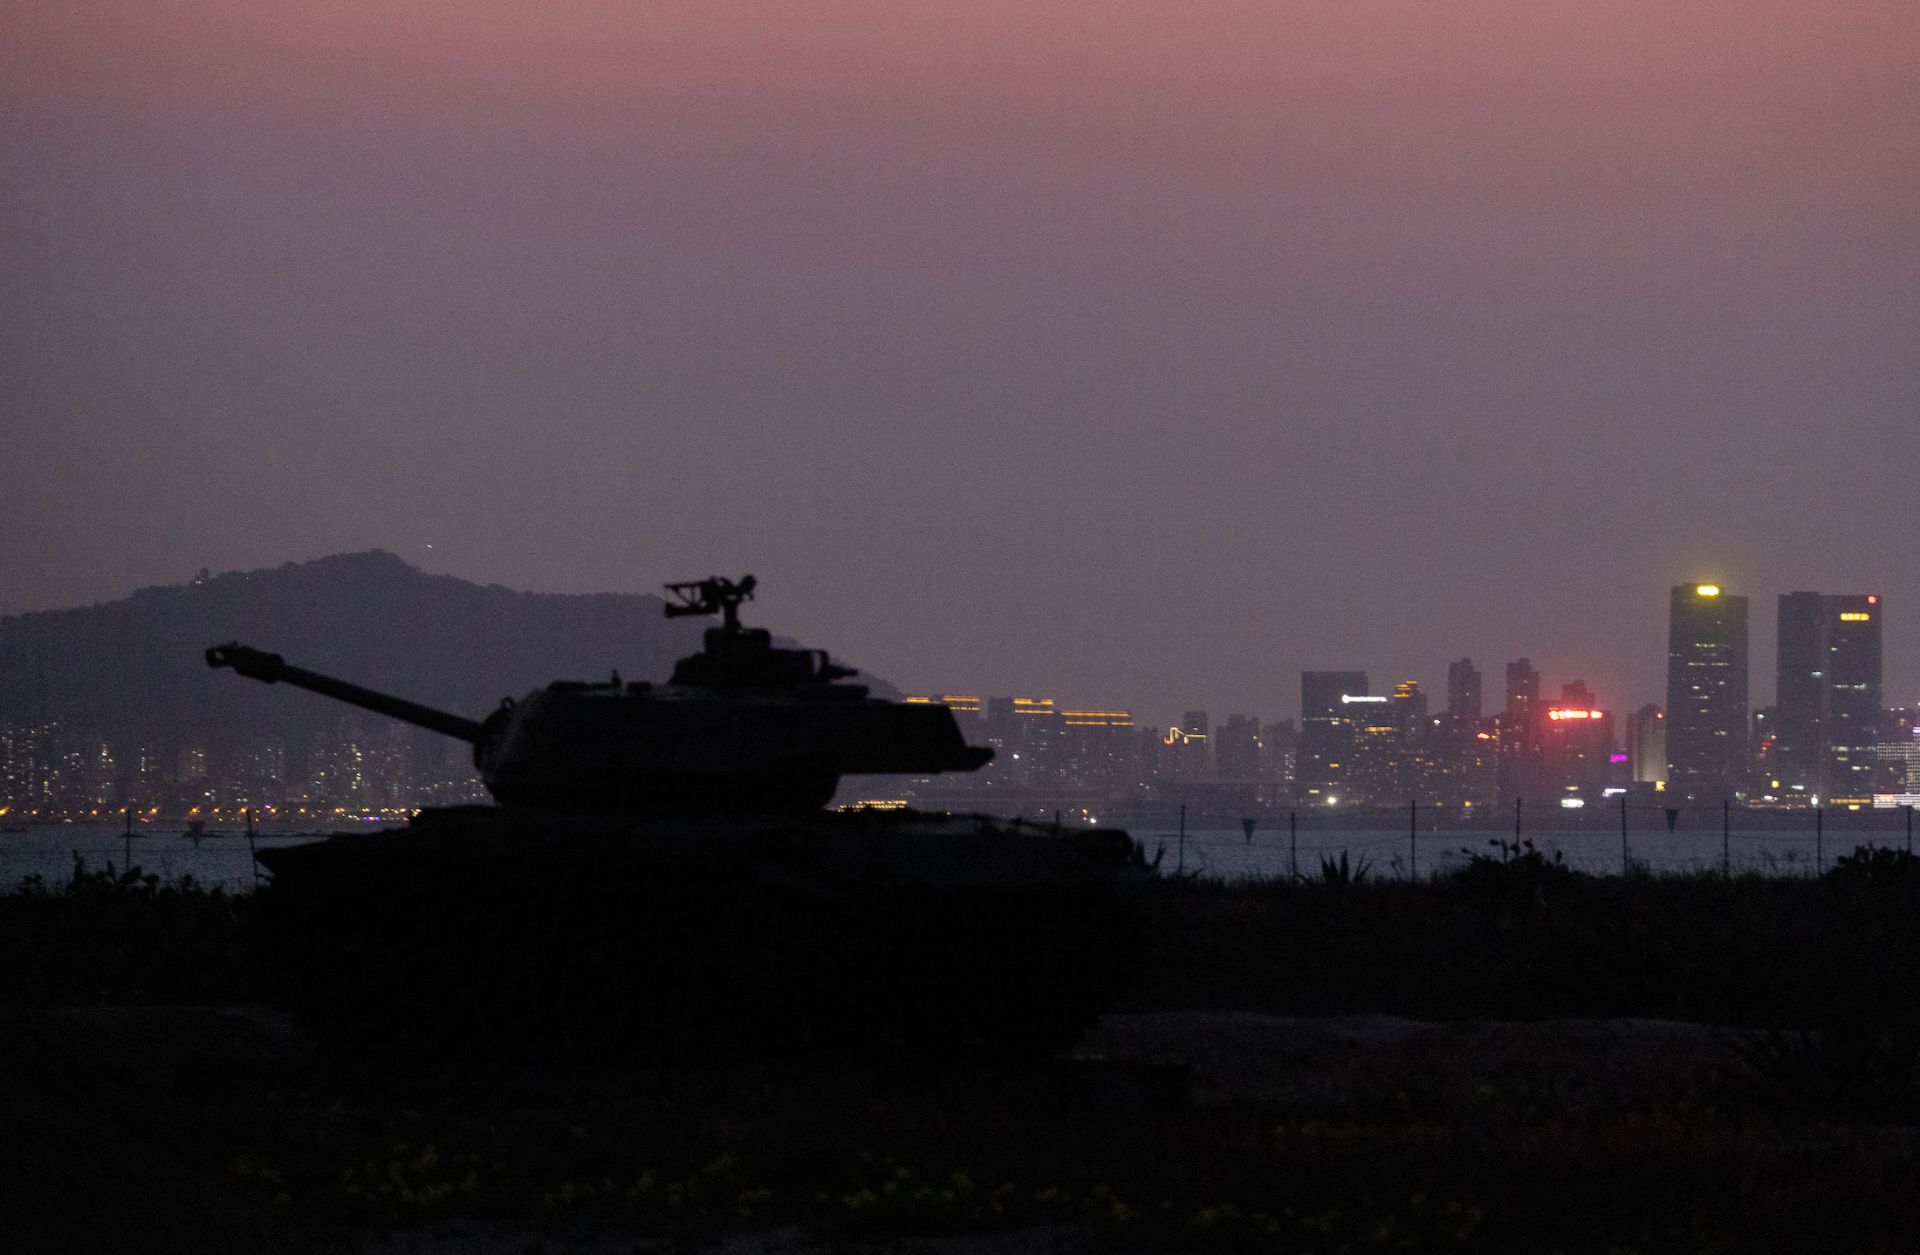 A Taiwanese tank on display for tourists is seen silhouetted against the skyline of the Chinese city Xiamen in Kinmen, Taiwan, an island in the Taiwan Strait that is part of Taiwan's territory.